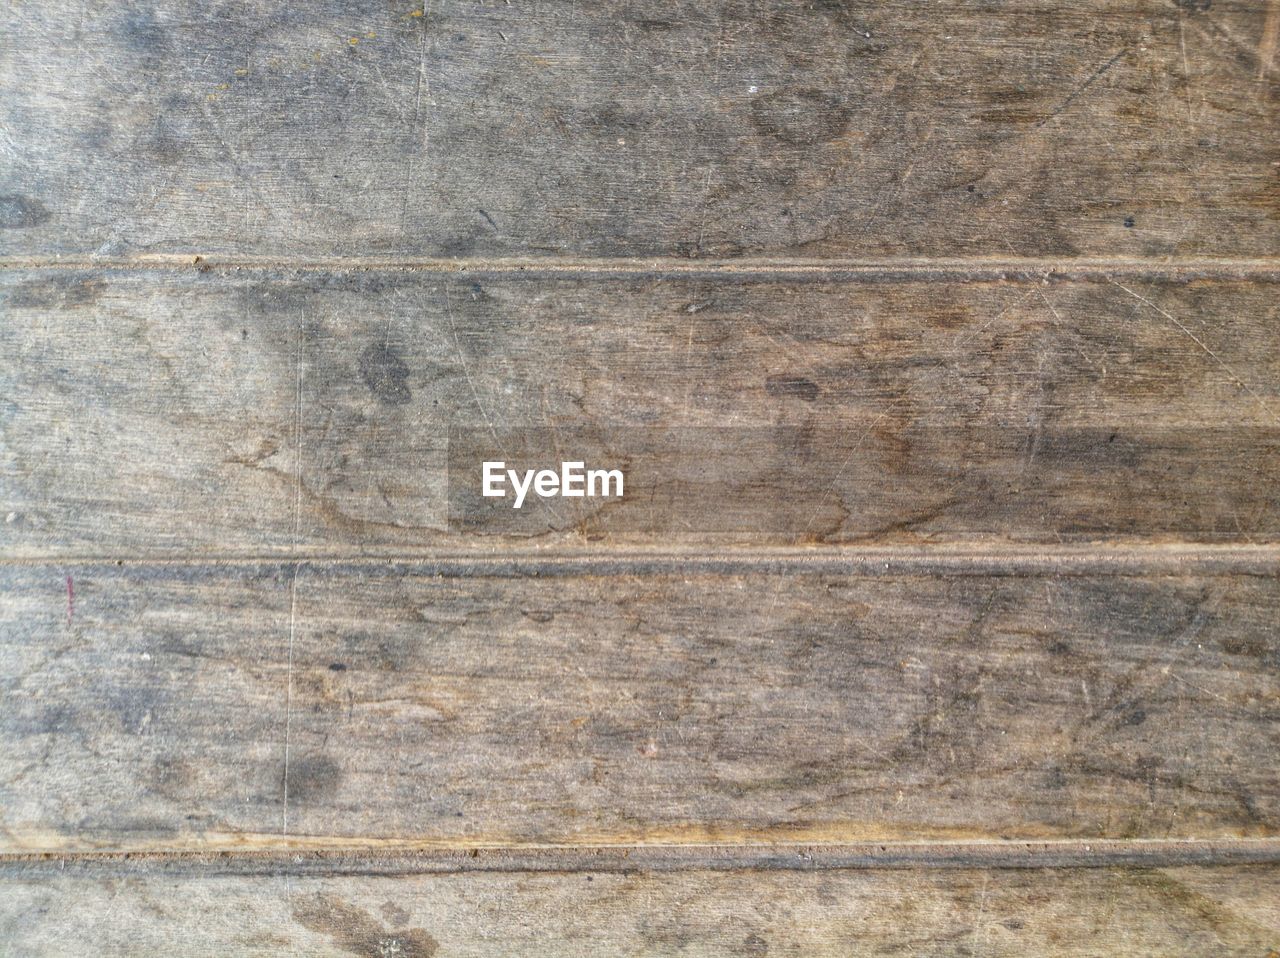 FULL FRAME SHOT OF WEATHERED WOODEN SURFACE